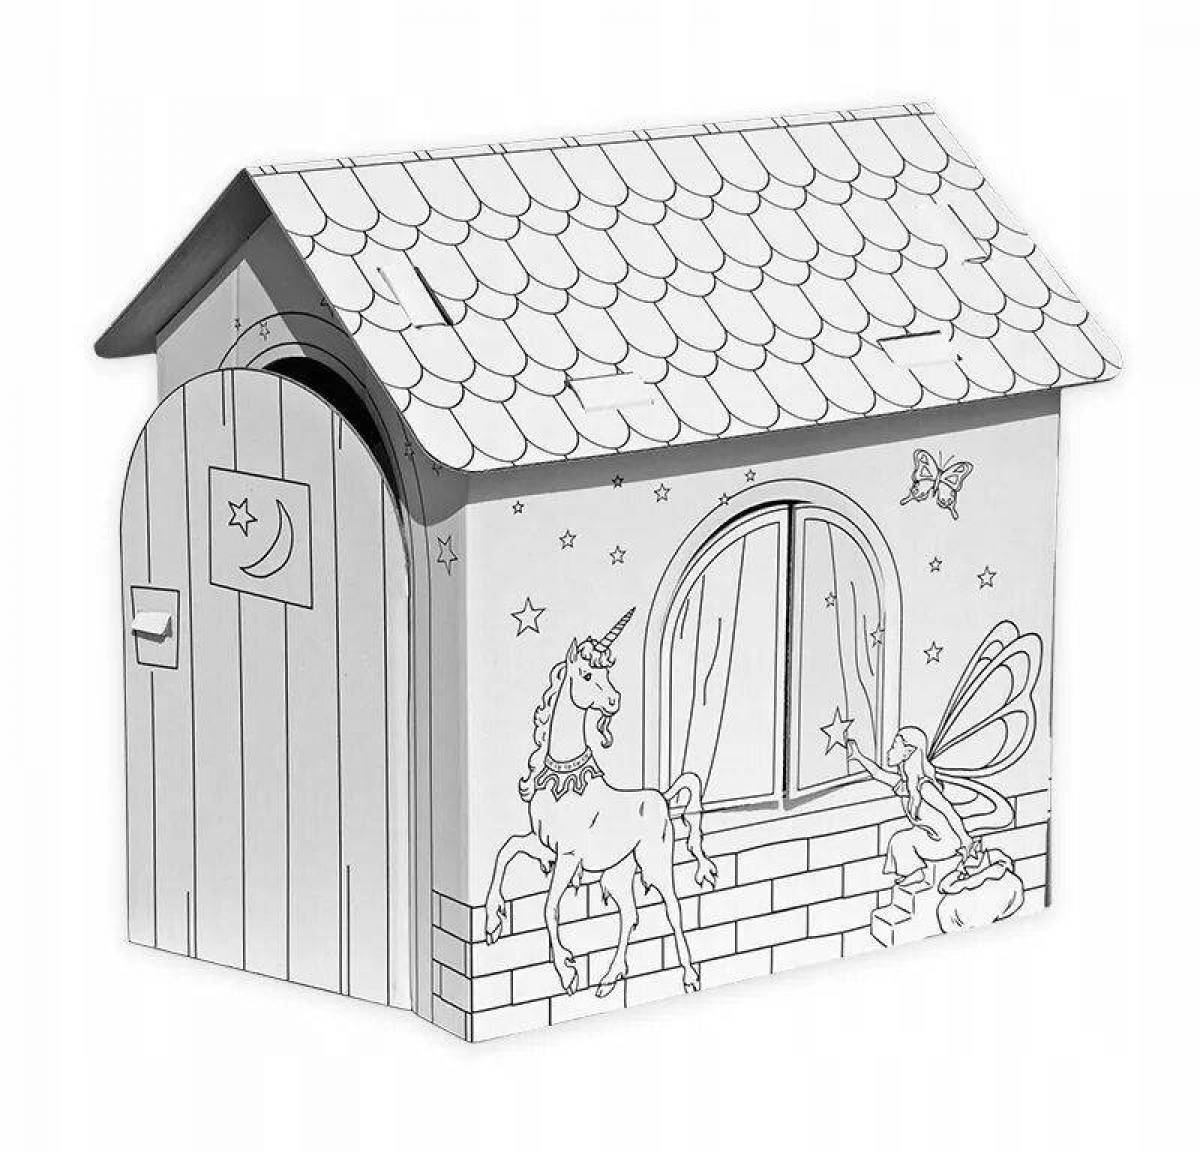 Coloring book humorous paper house